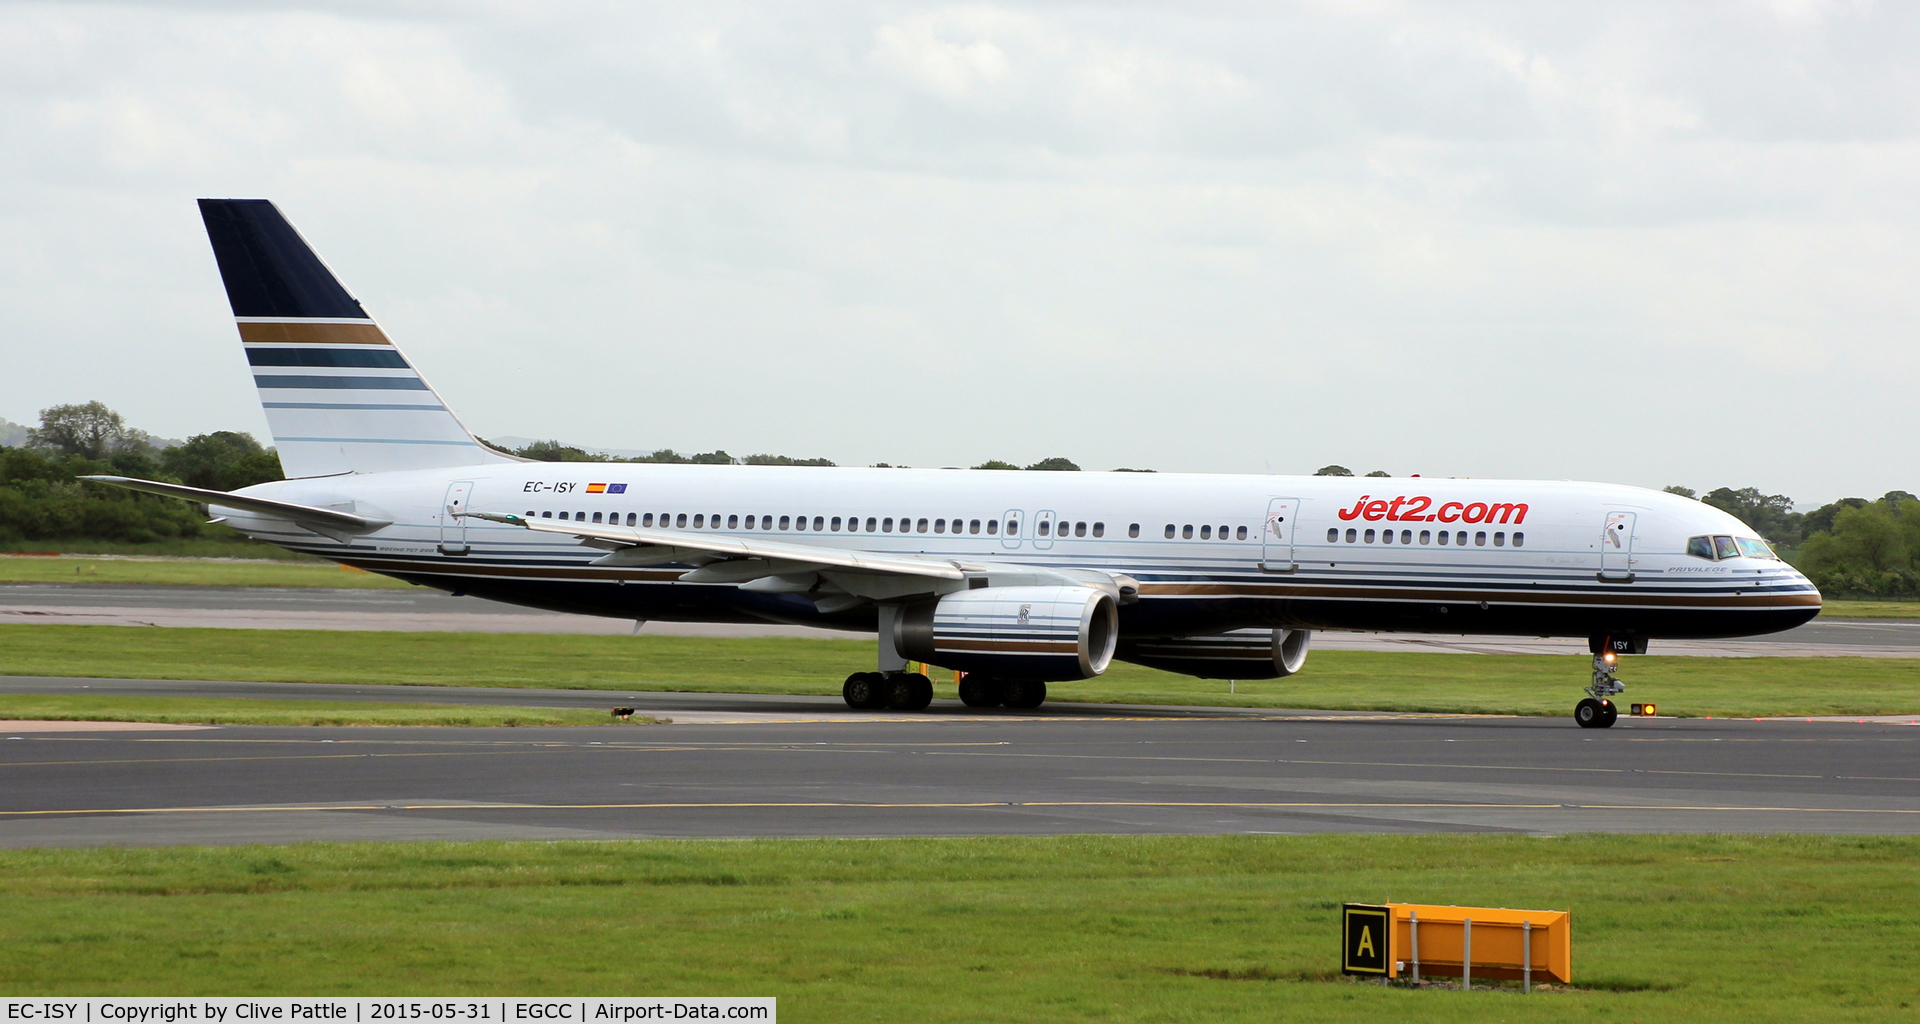 EC-ISY, 1993 Boeing 757-256 C/N 26241, On lease to Jet2 at Manchester EGCC